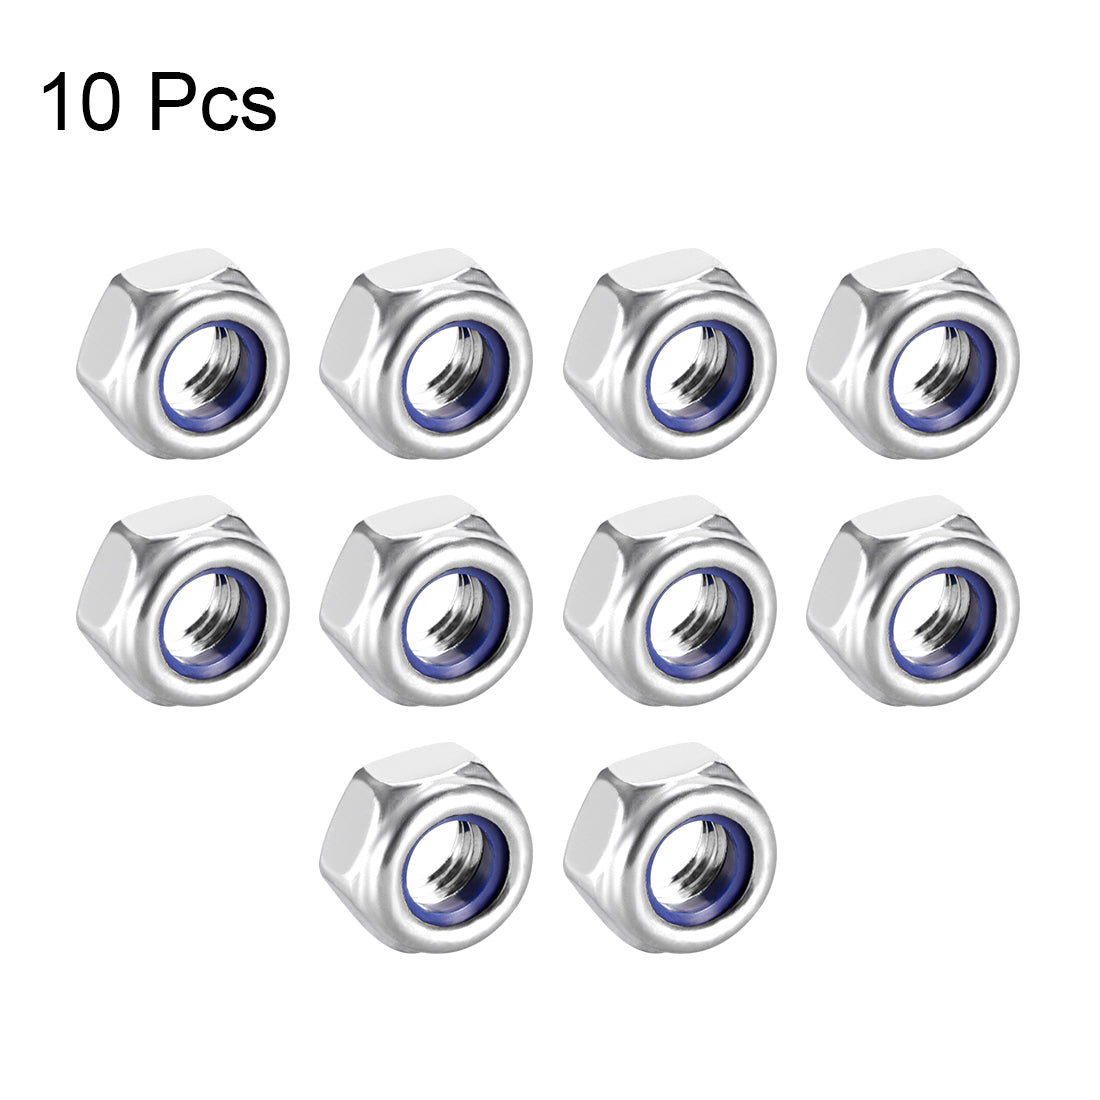 uxcell Uxcell M6x1mm Hex Lock Nuts Stainless Steel Nylon Insert Self-Lock Nuts, 10Pcs Silver